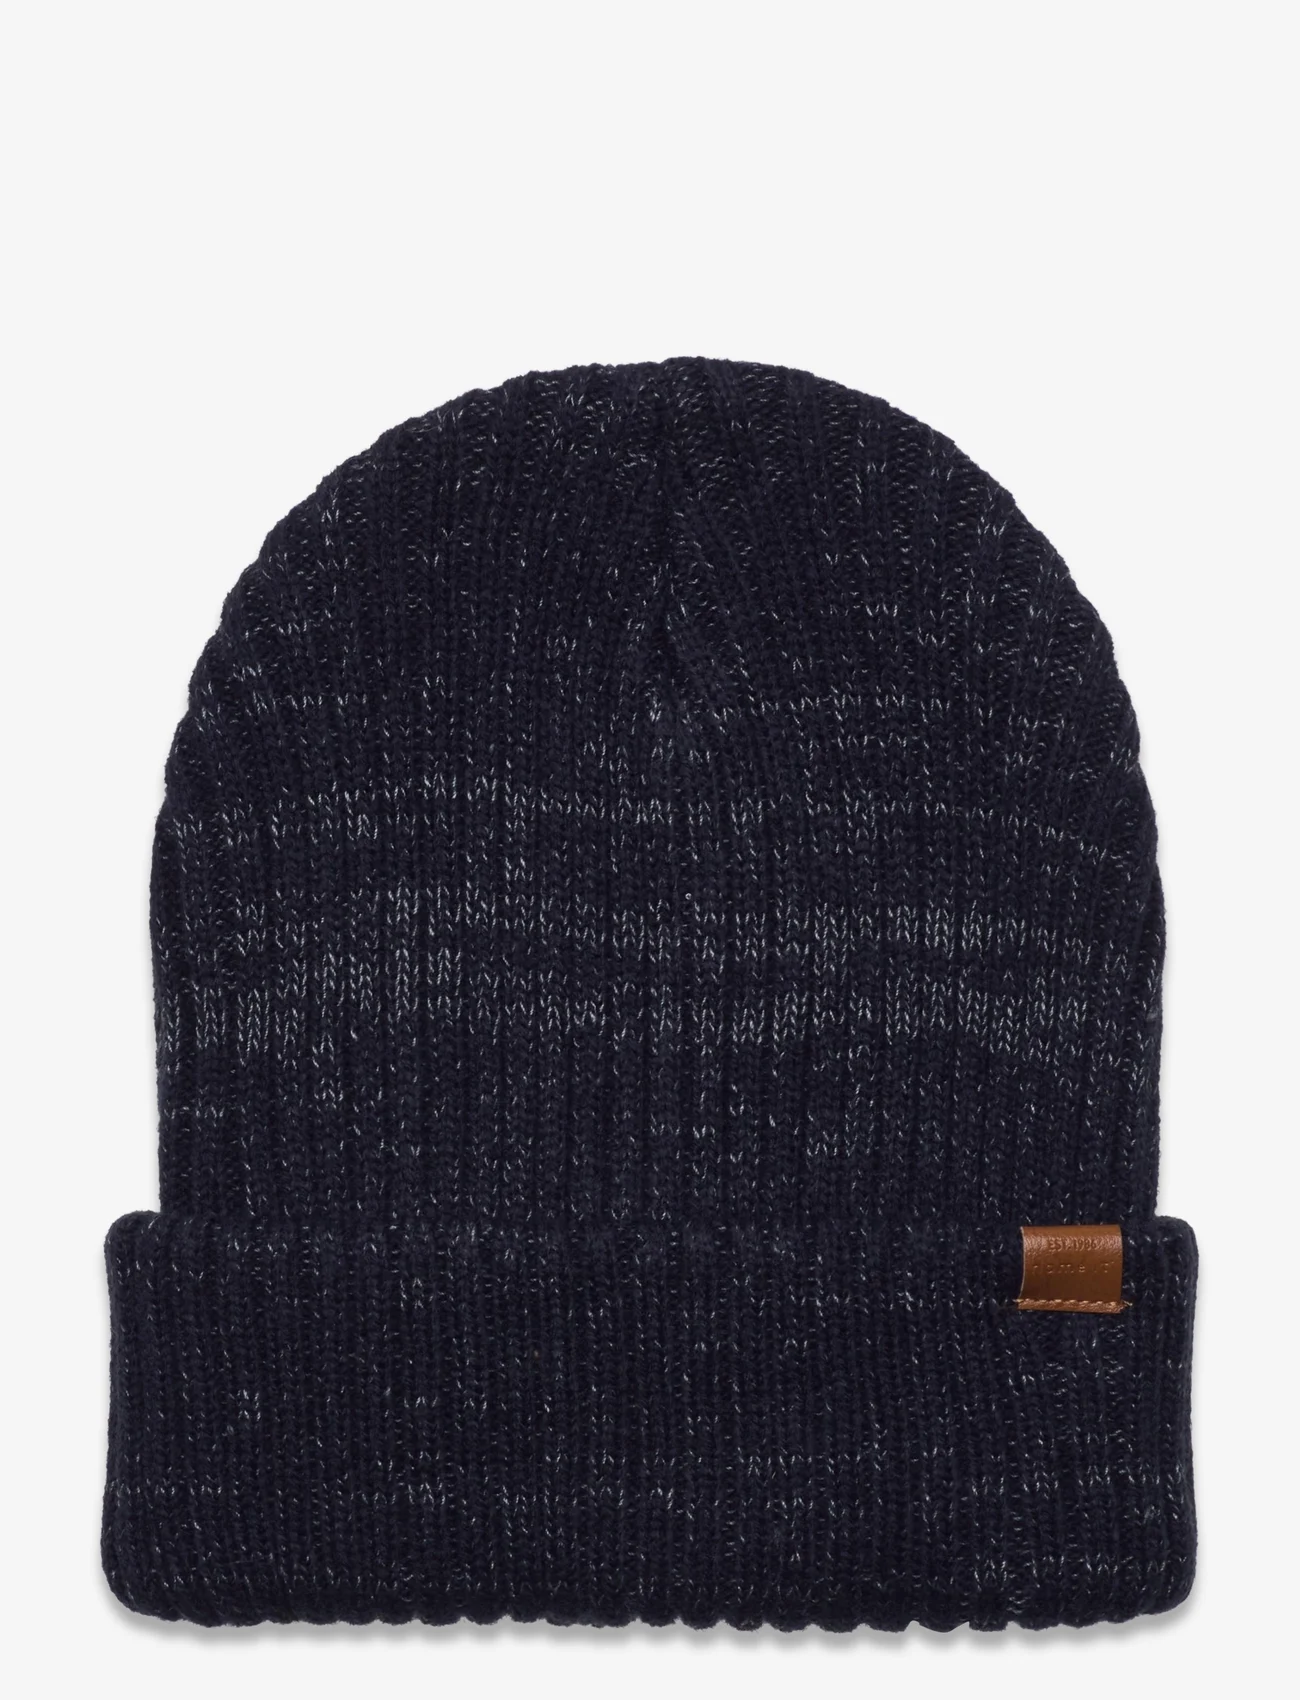 name it - NKNMILAN KNIT HAT2 - lowest prices - dark sapphire - 0